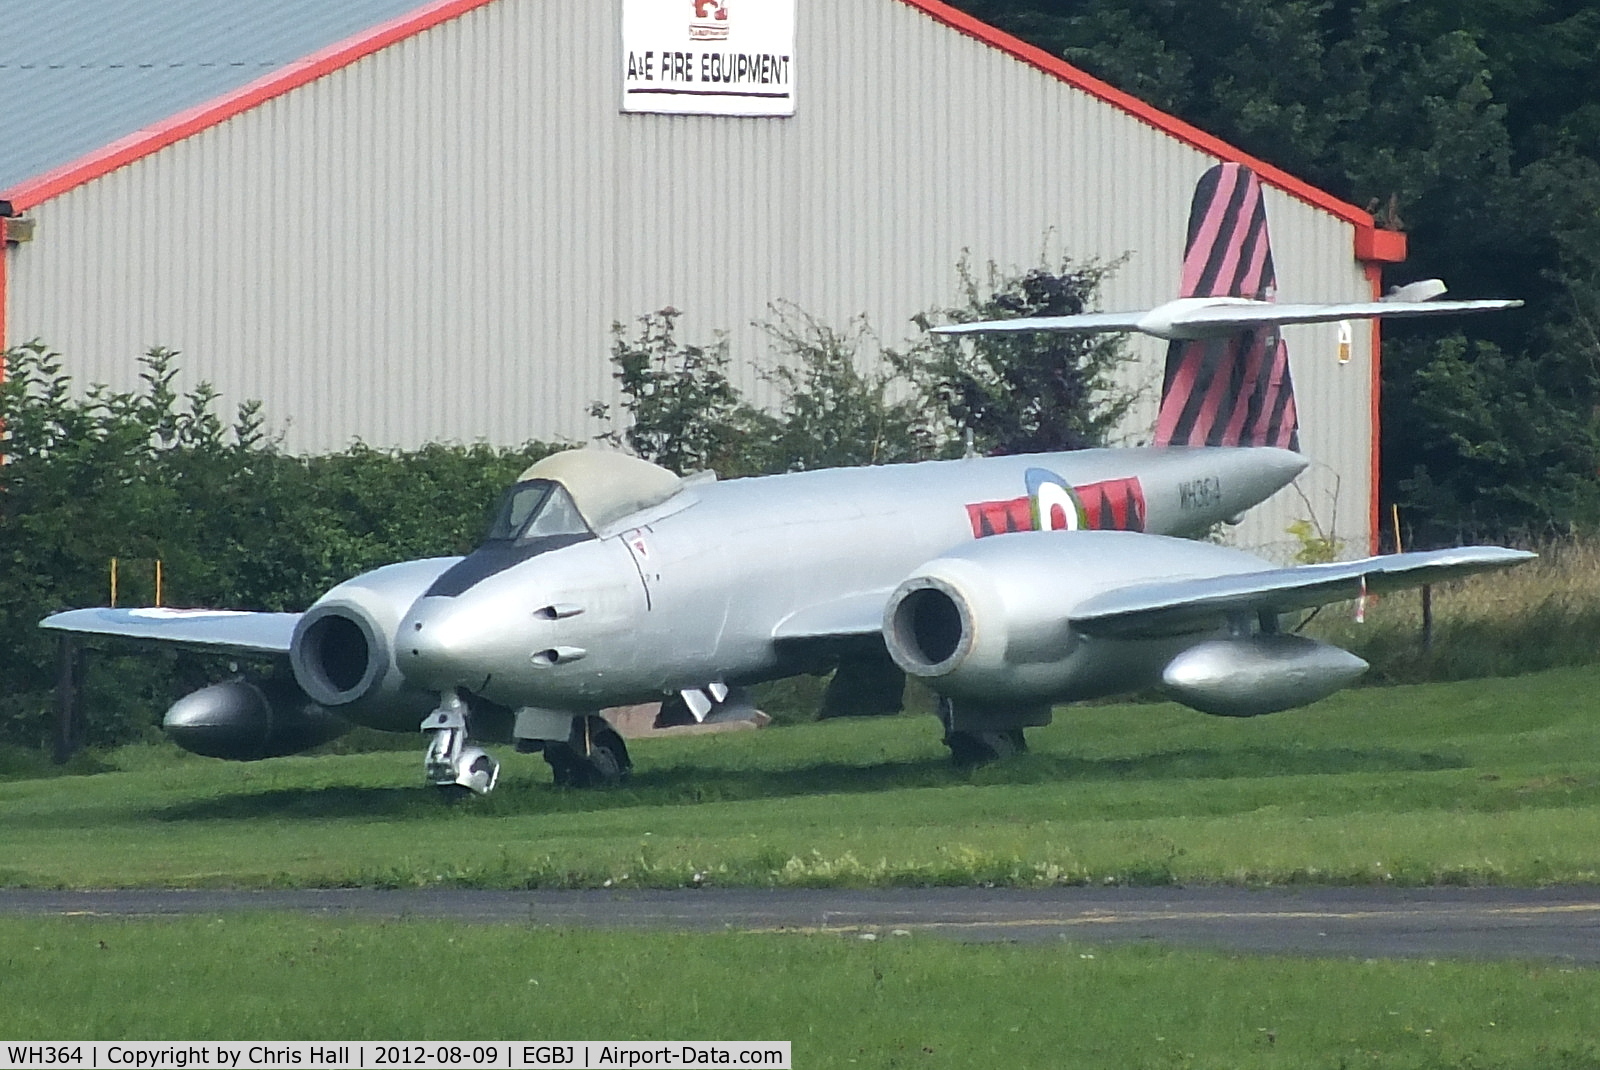 WH364, Gloster Meteor F.8 C/N Not found WH364, owned by The Jet Age Museum, now parked by the Flying Shack cafe